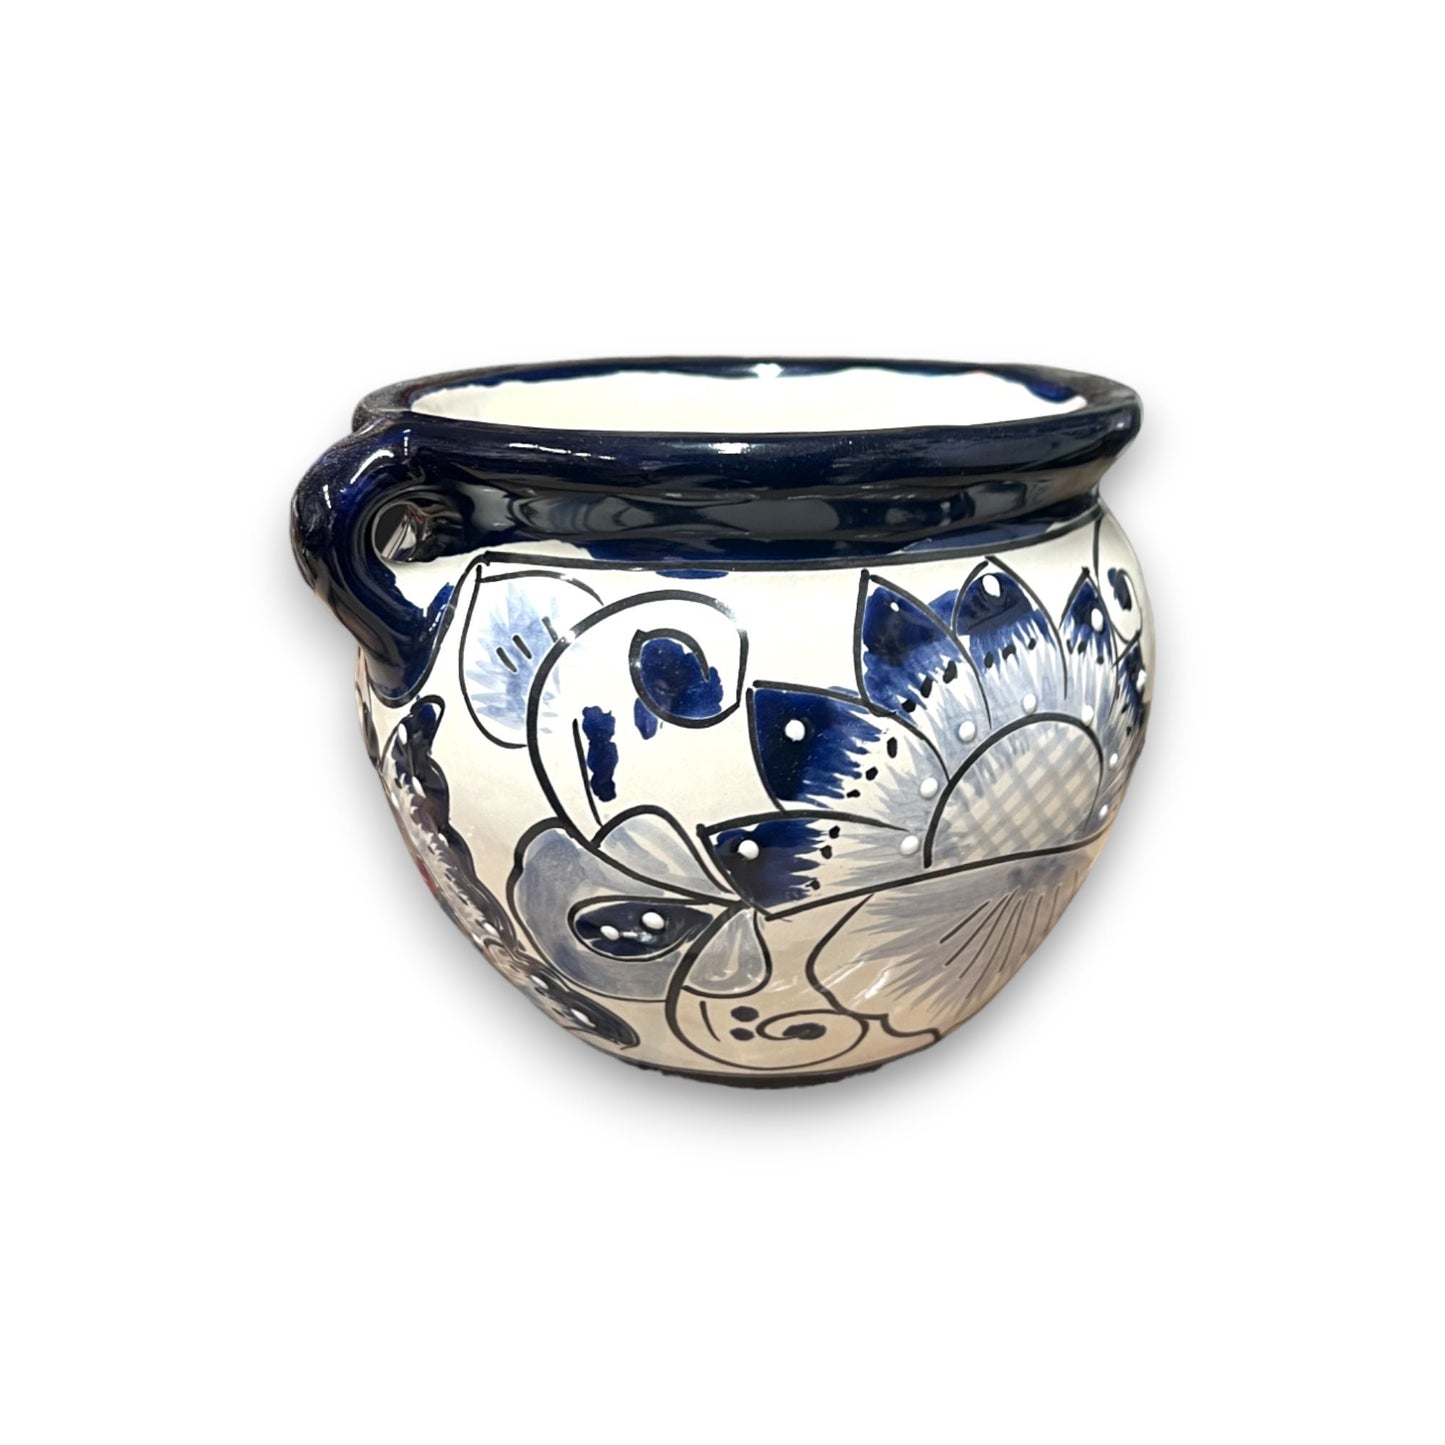 Set of 3 Talavera Round Planters | Hand-Painted Blue and White Design